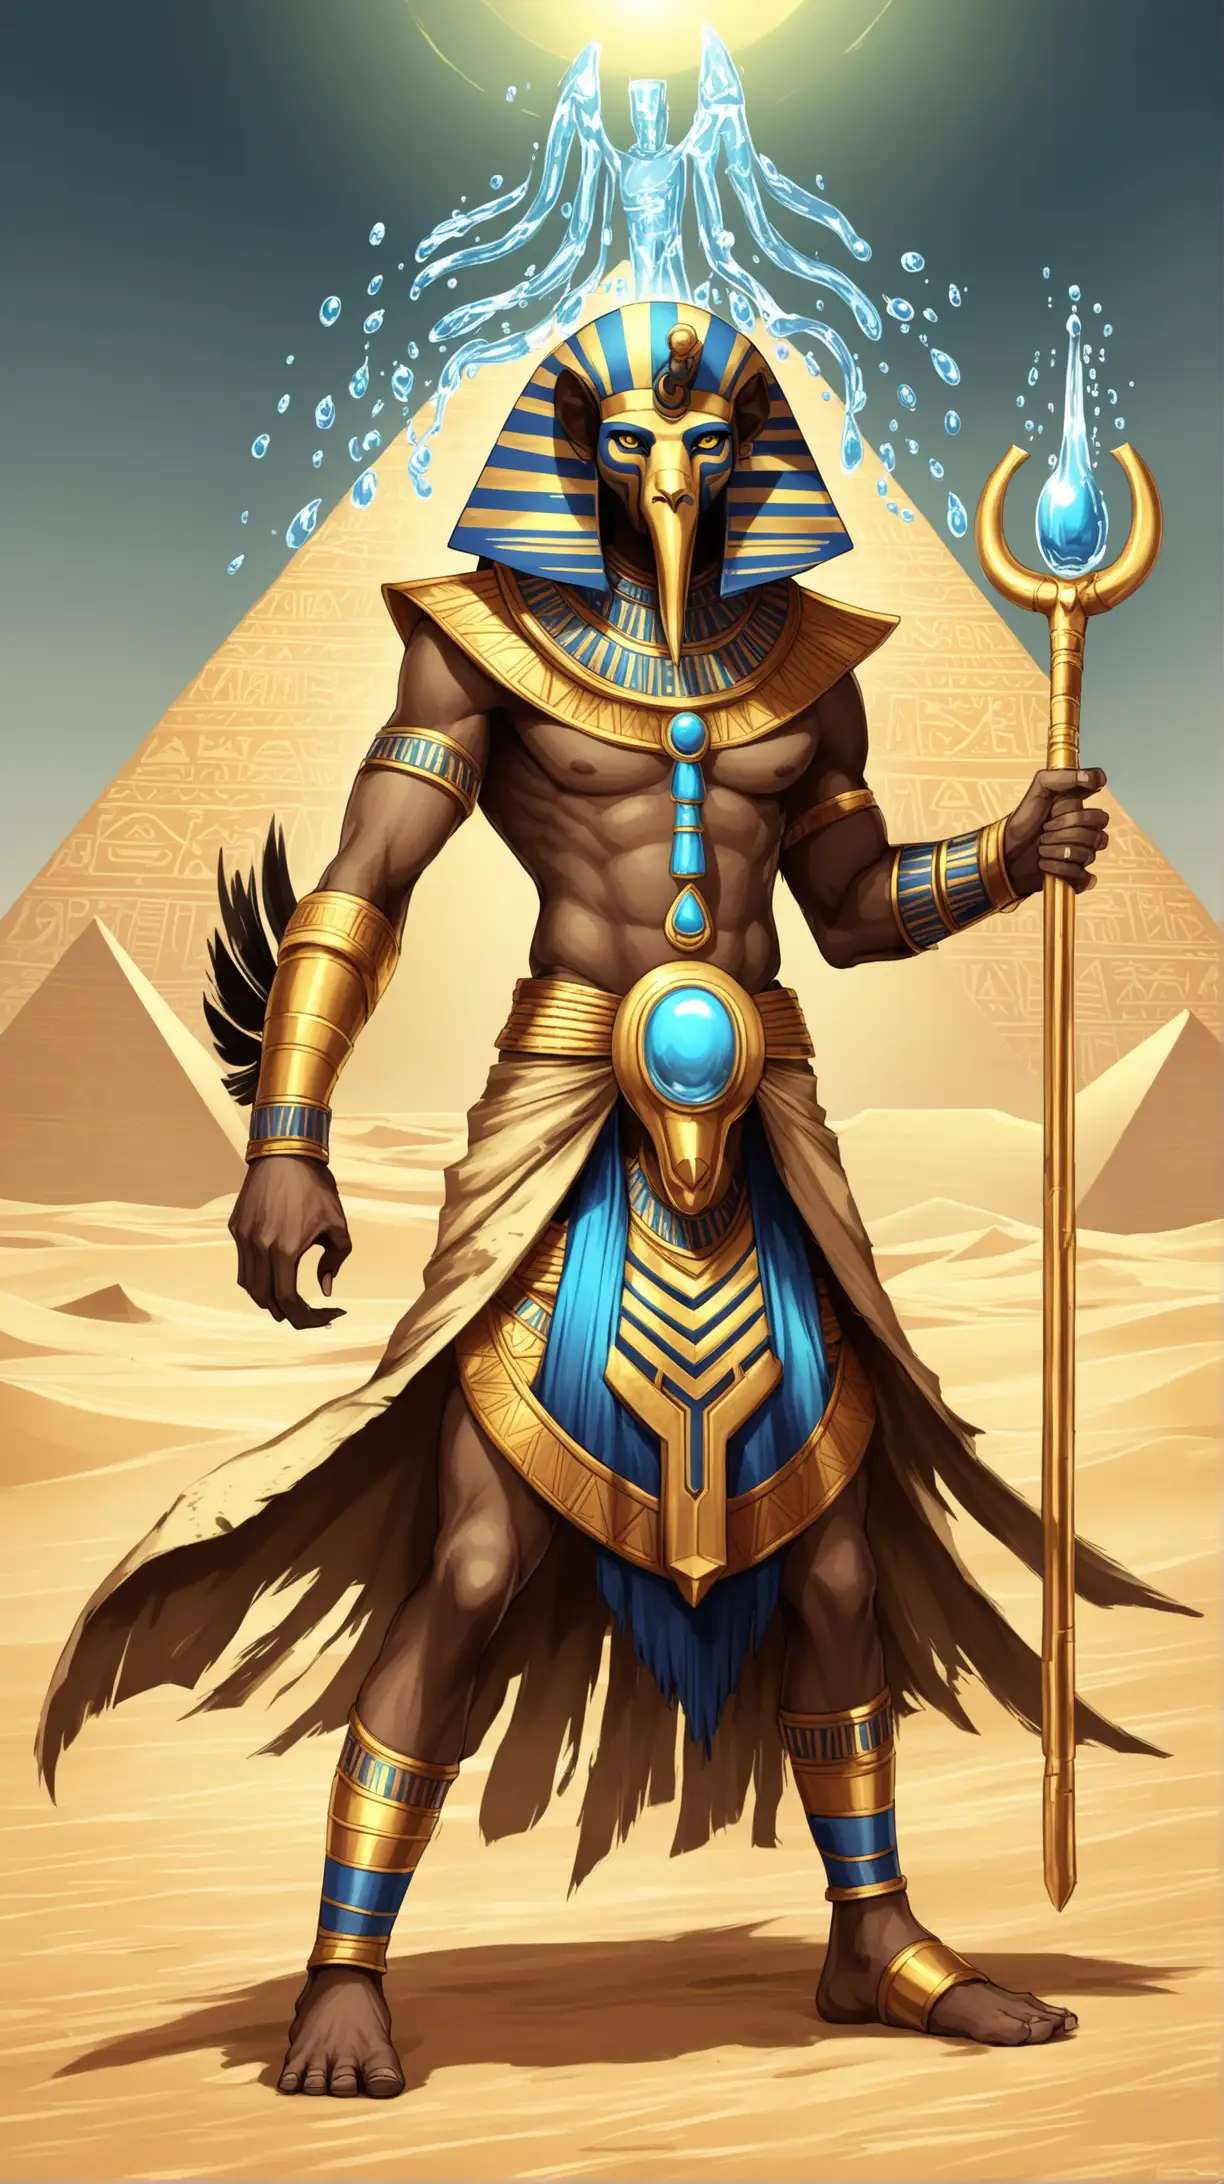 desert hunter with water powers wearing clothes themed around the Egyptian god Khnum